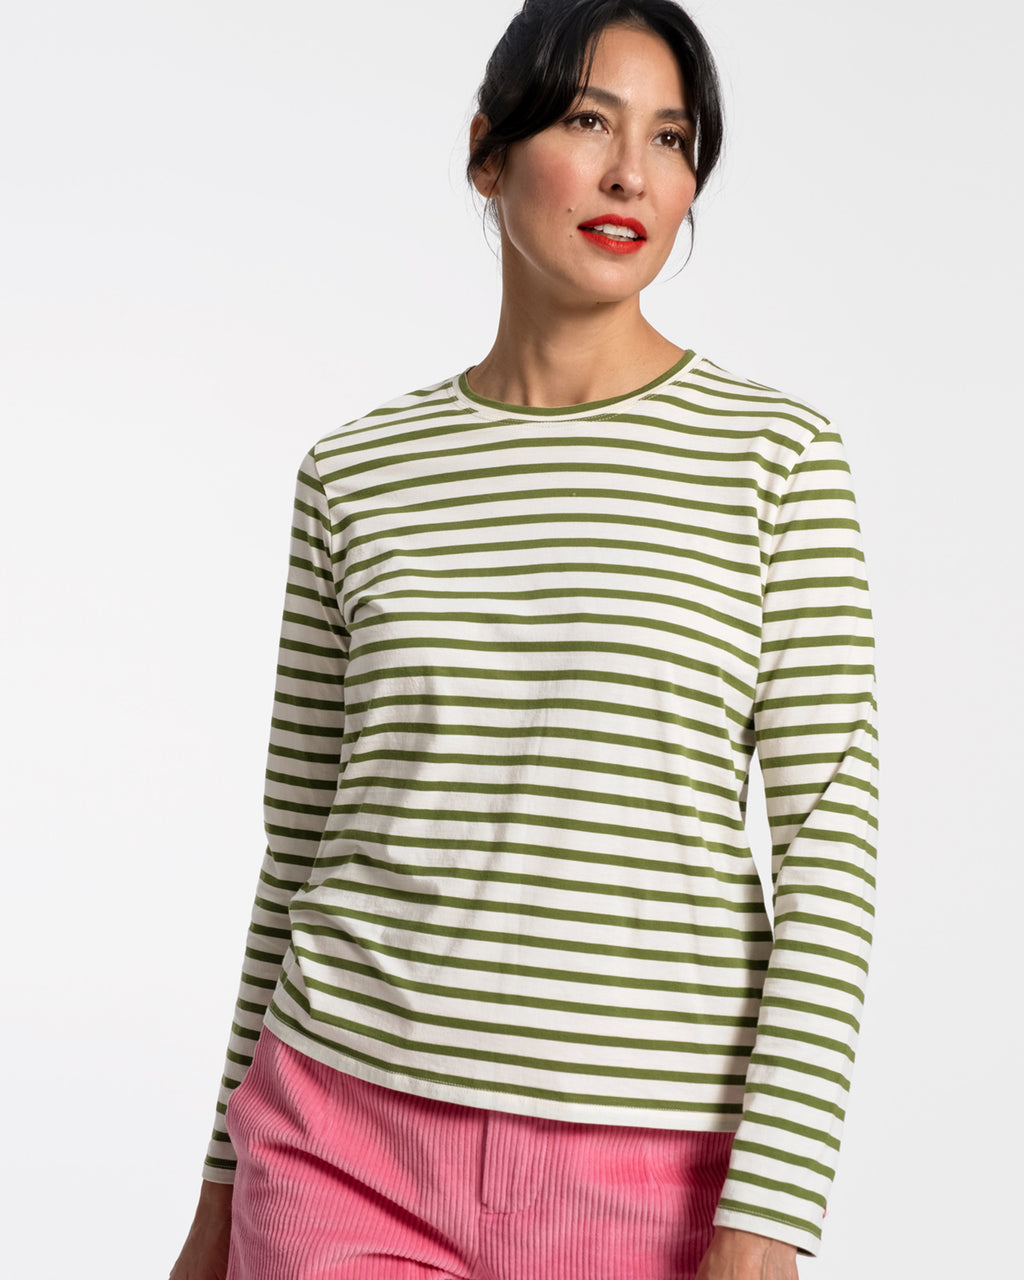 Long Sleeve Striped Oyster Green Valentine Frances Shirt 